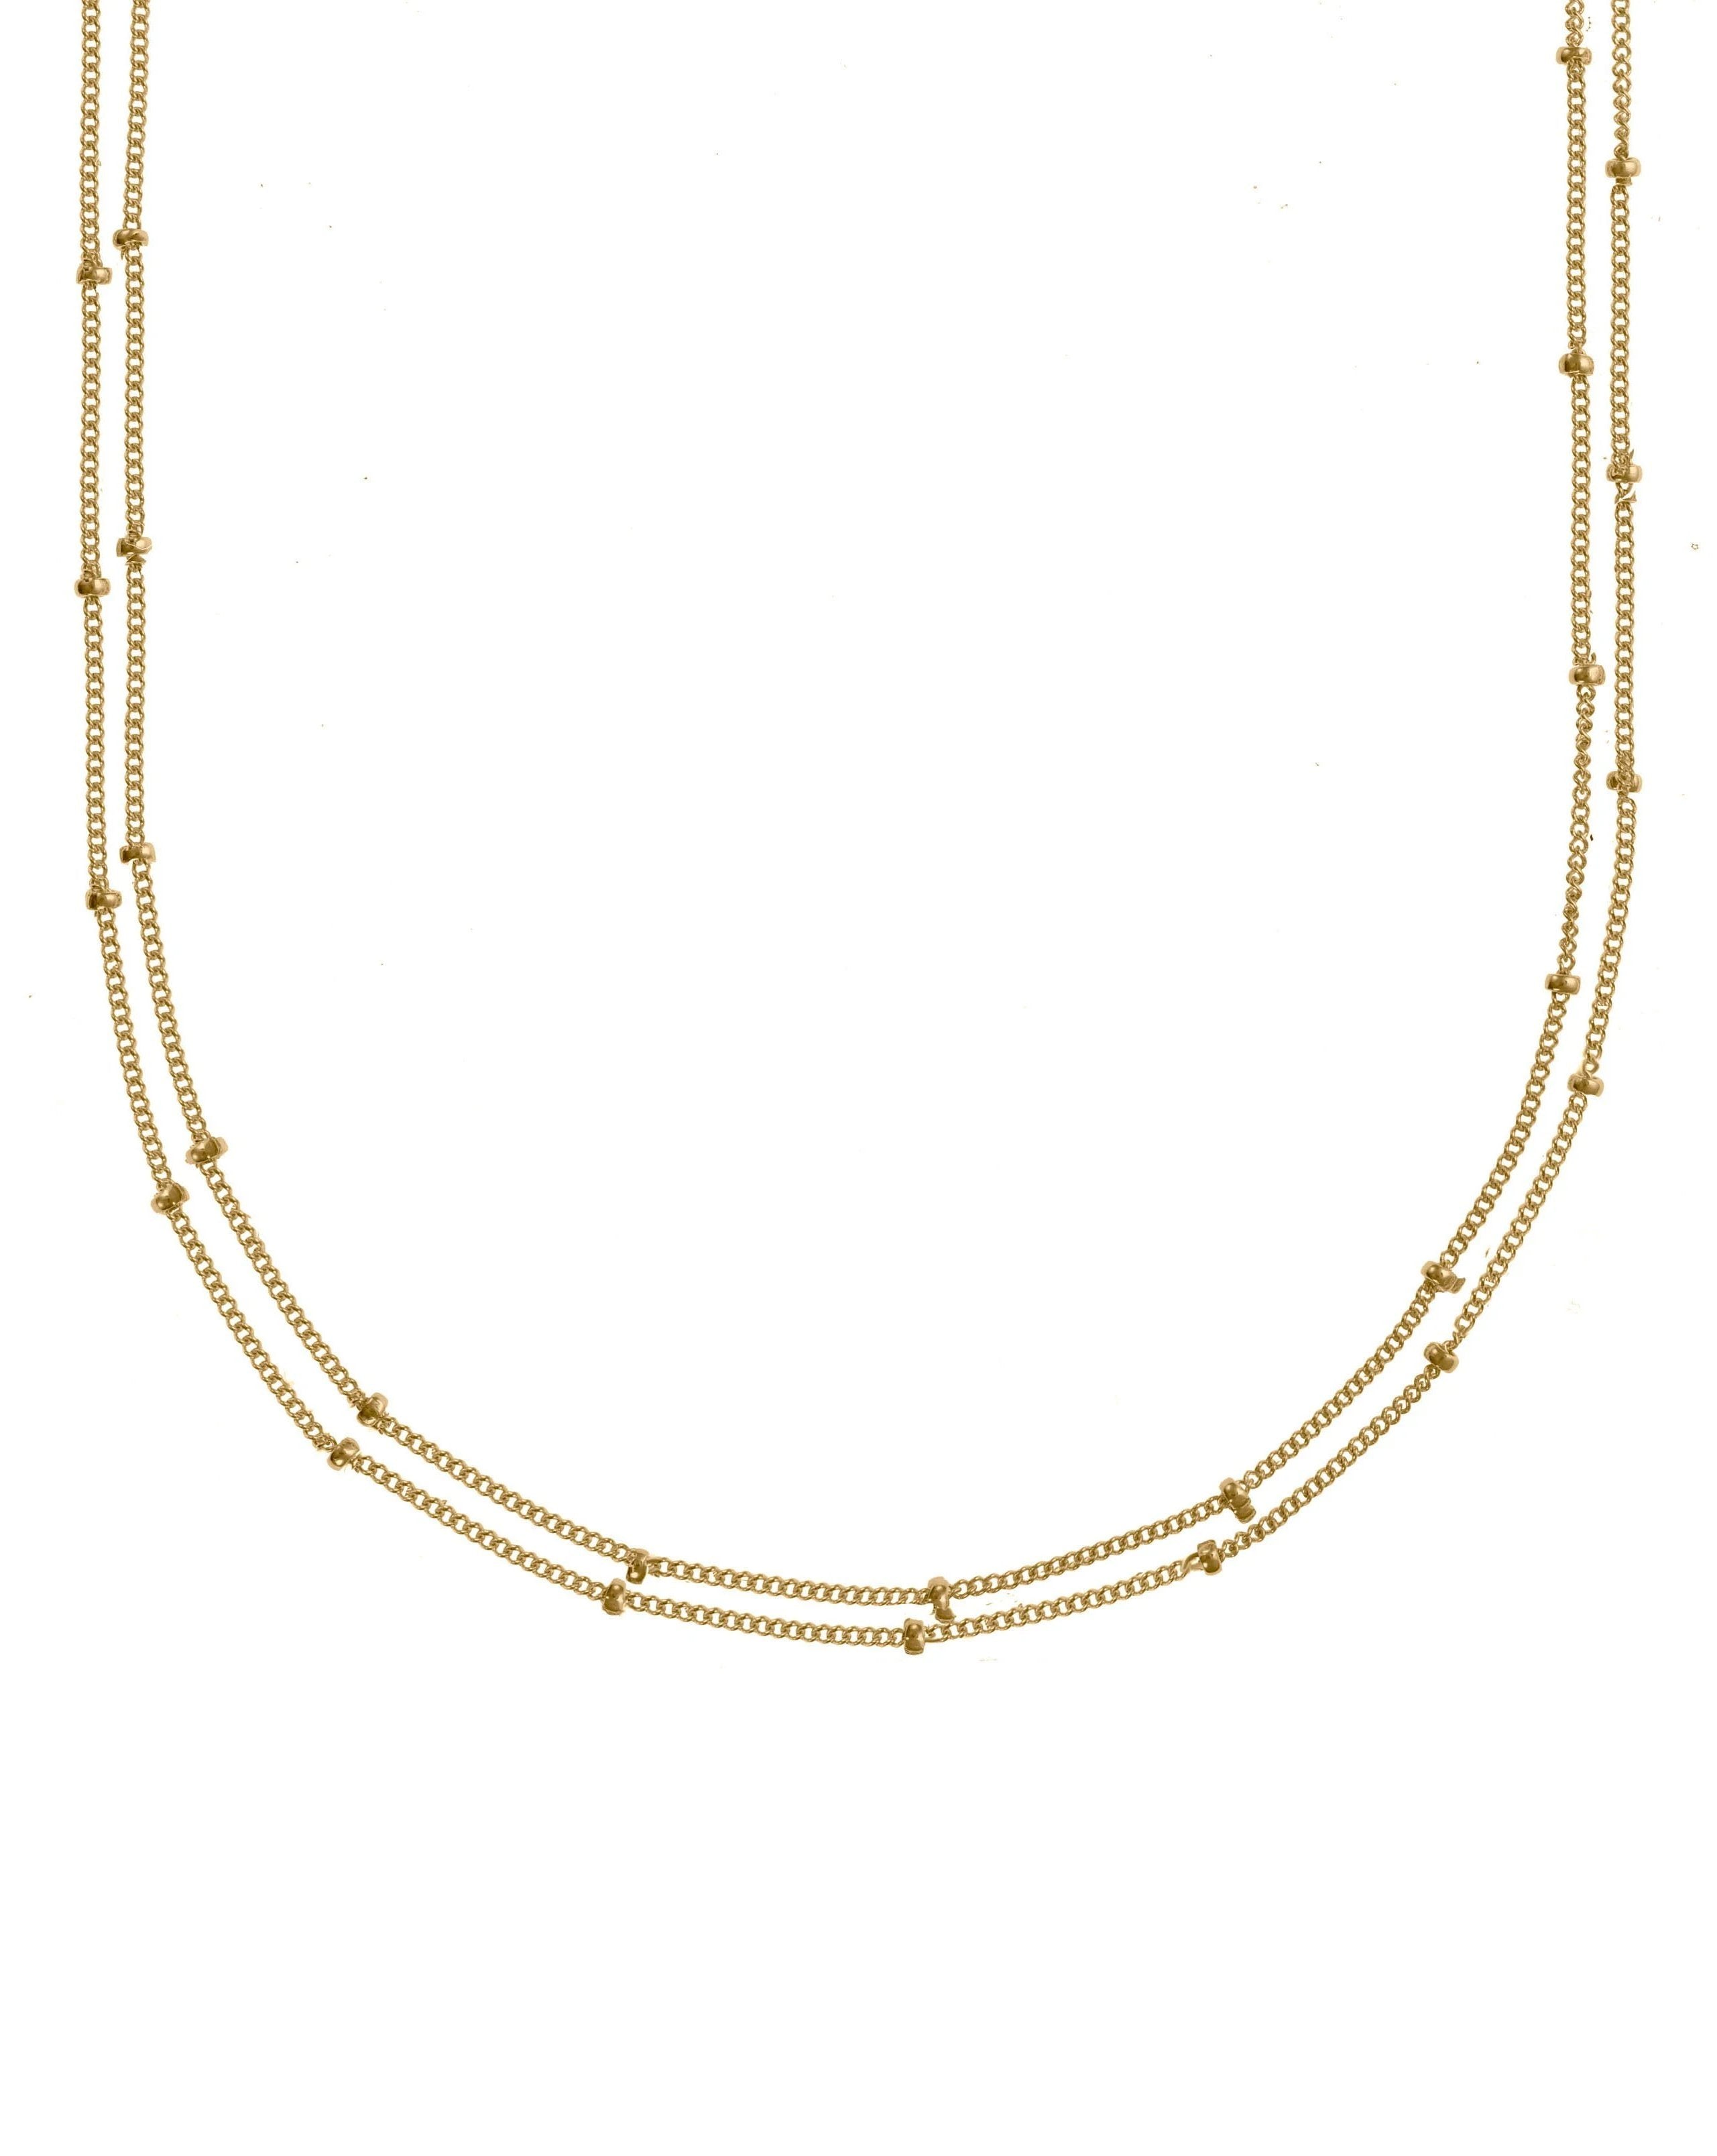 Galas Choker by KOZAKH. A 14 to 16 inch adjustable length double chain style choker necklace in 14K Gold Filled.